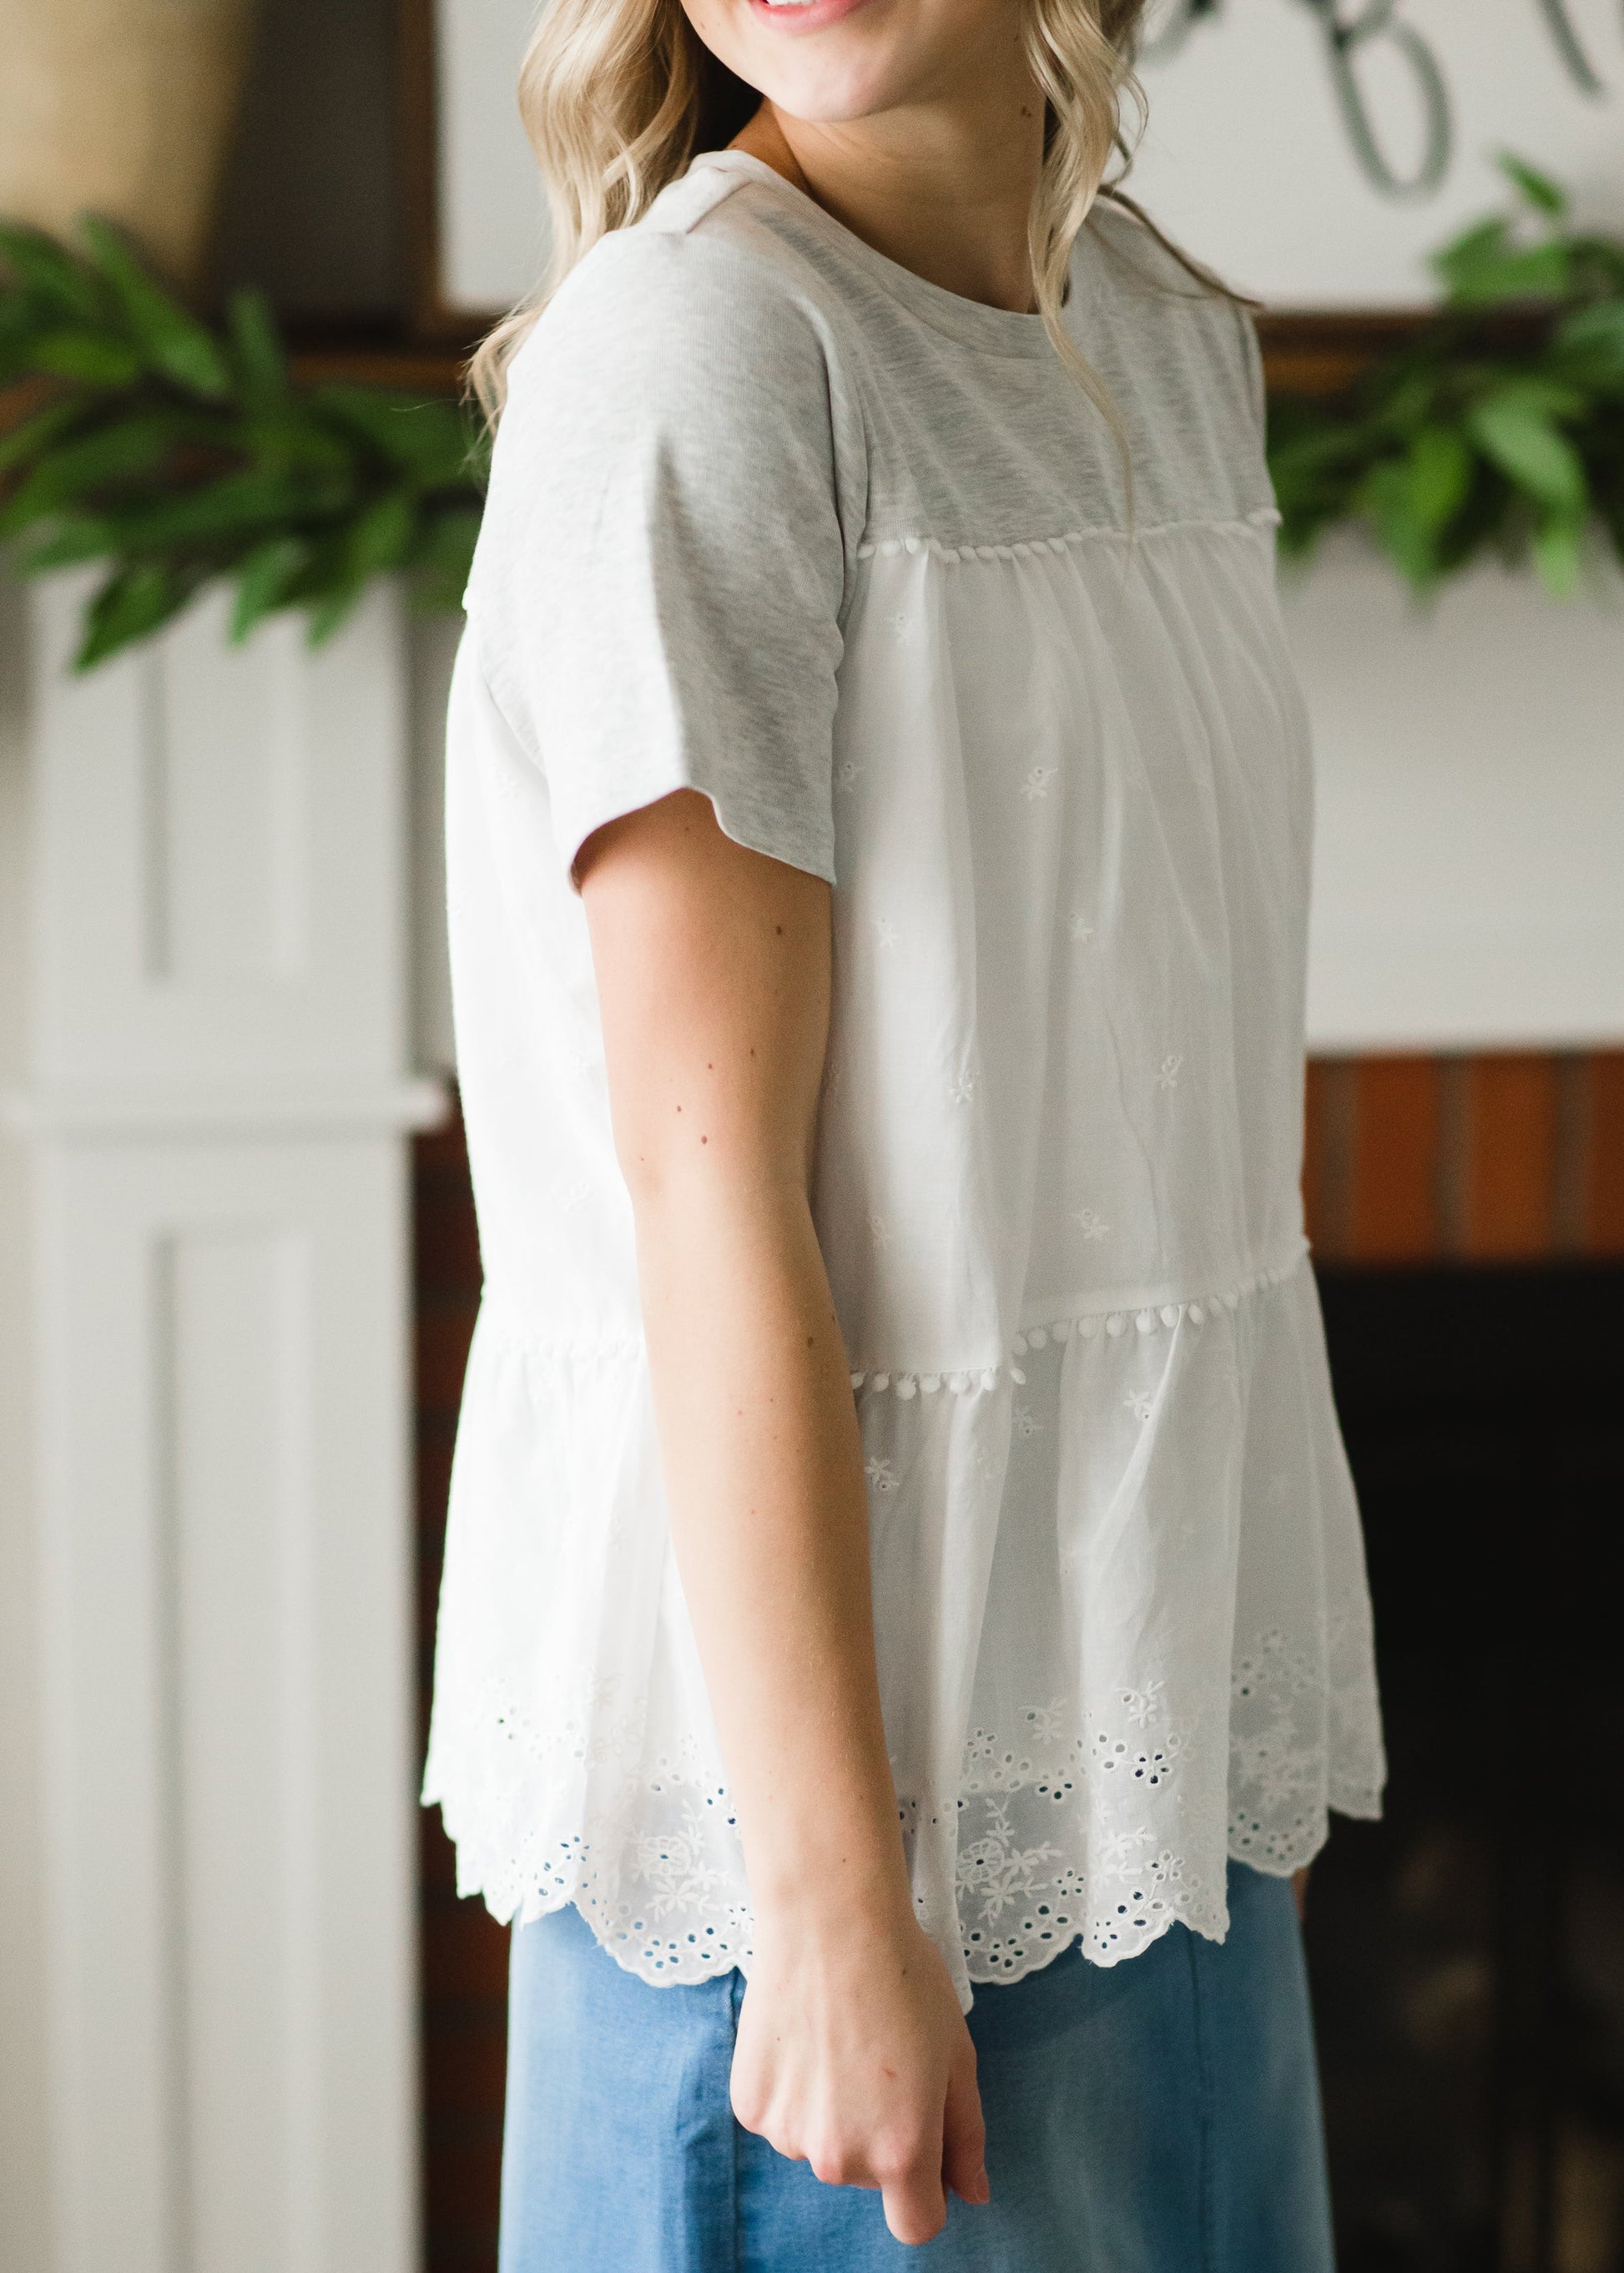 Heather Gray Eyelet Top - FINAL SALE Tops